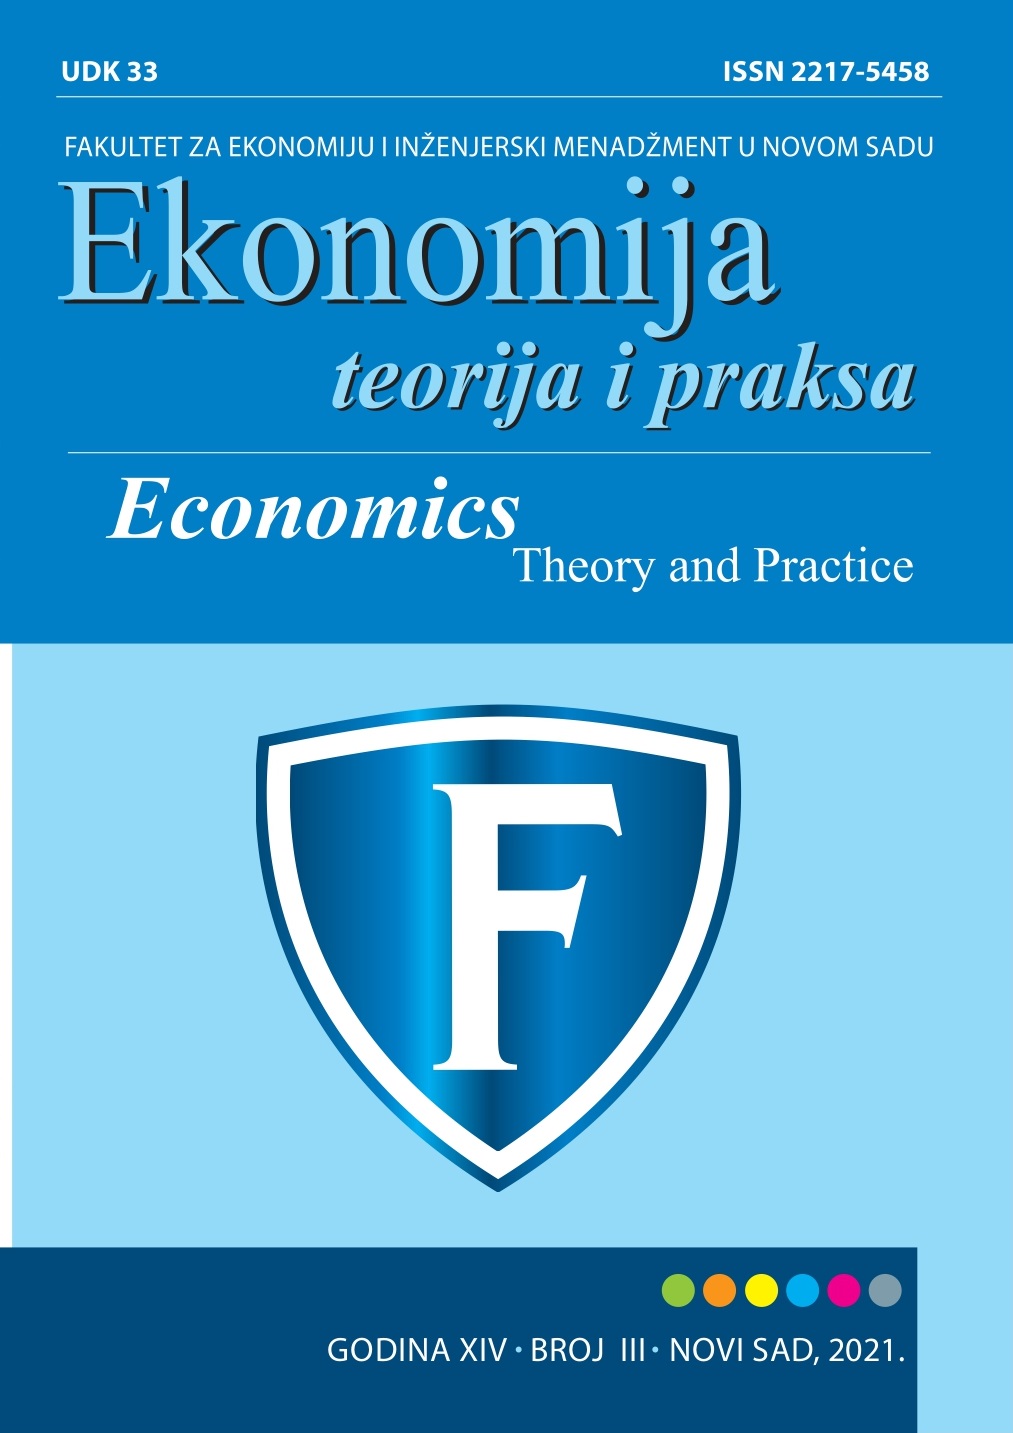 					View Vol. 14 No. 3 (2021): Economics - Theory and Practice
				